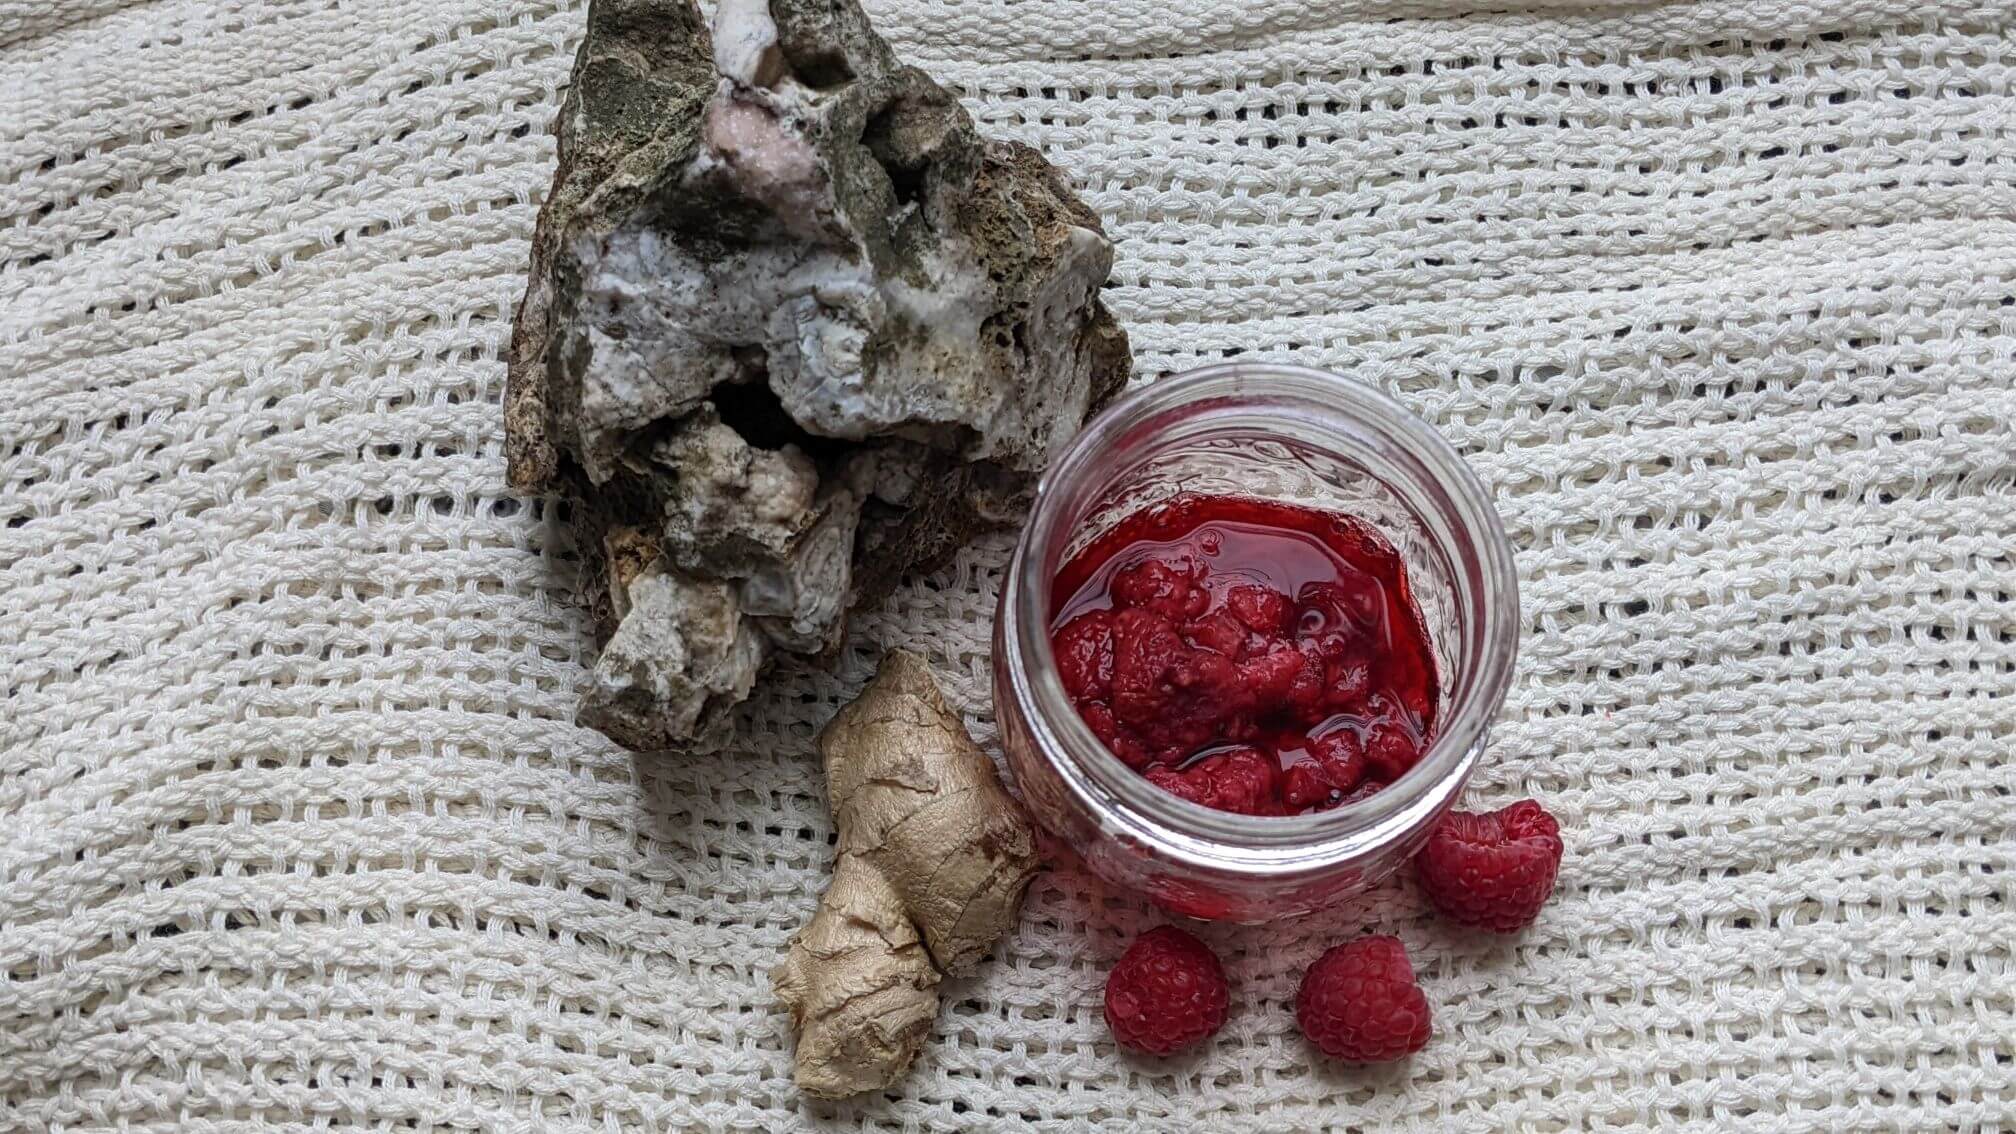 A jar of thawed, frozen raspberries sits on a linen scarf with fresh raspberries scattered around a fresh ginger root. A natural rock with druzy quartz vein flanks the image.